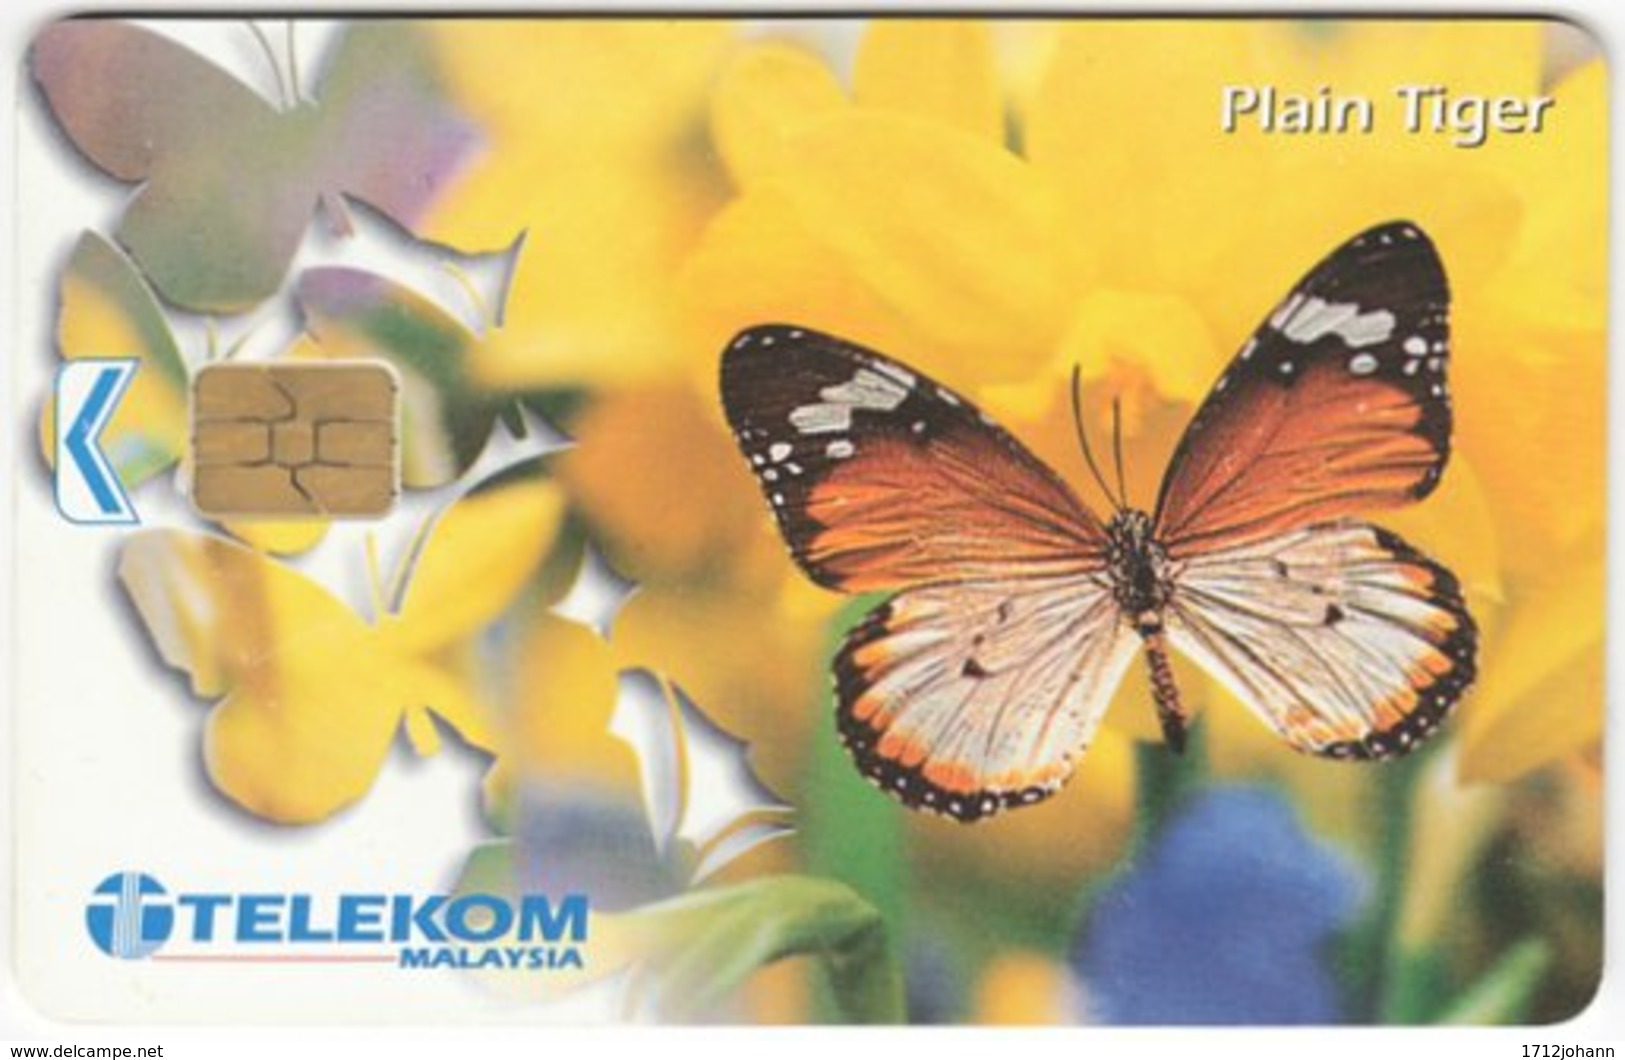 MALAYSIA A-634 Chip Telekom - Animal, Butterfly - Used - Malaysia